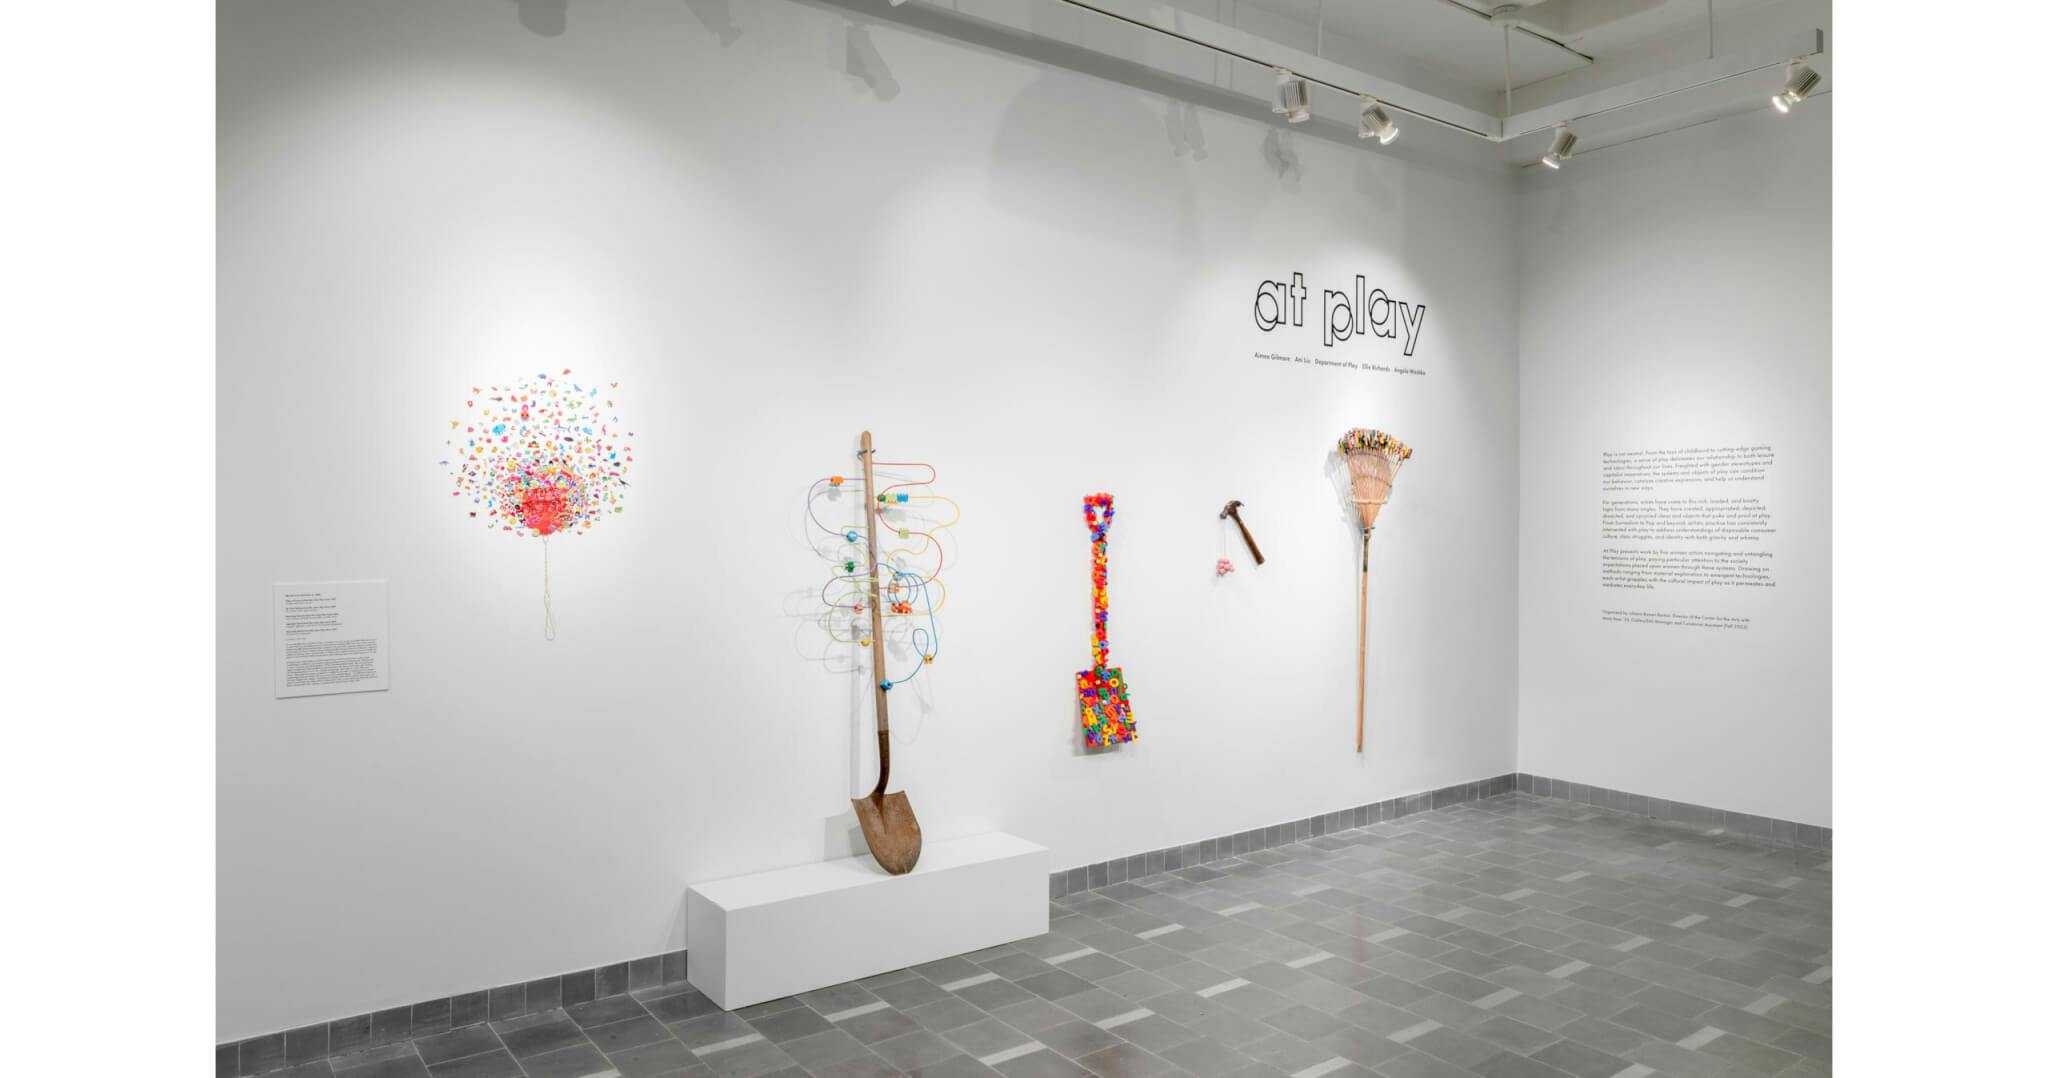 Rainbow colored artworks evoking play hang from a white wall in Northeastern's Gallery 360.